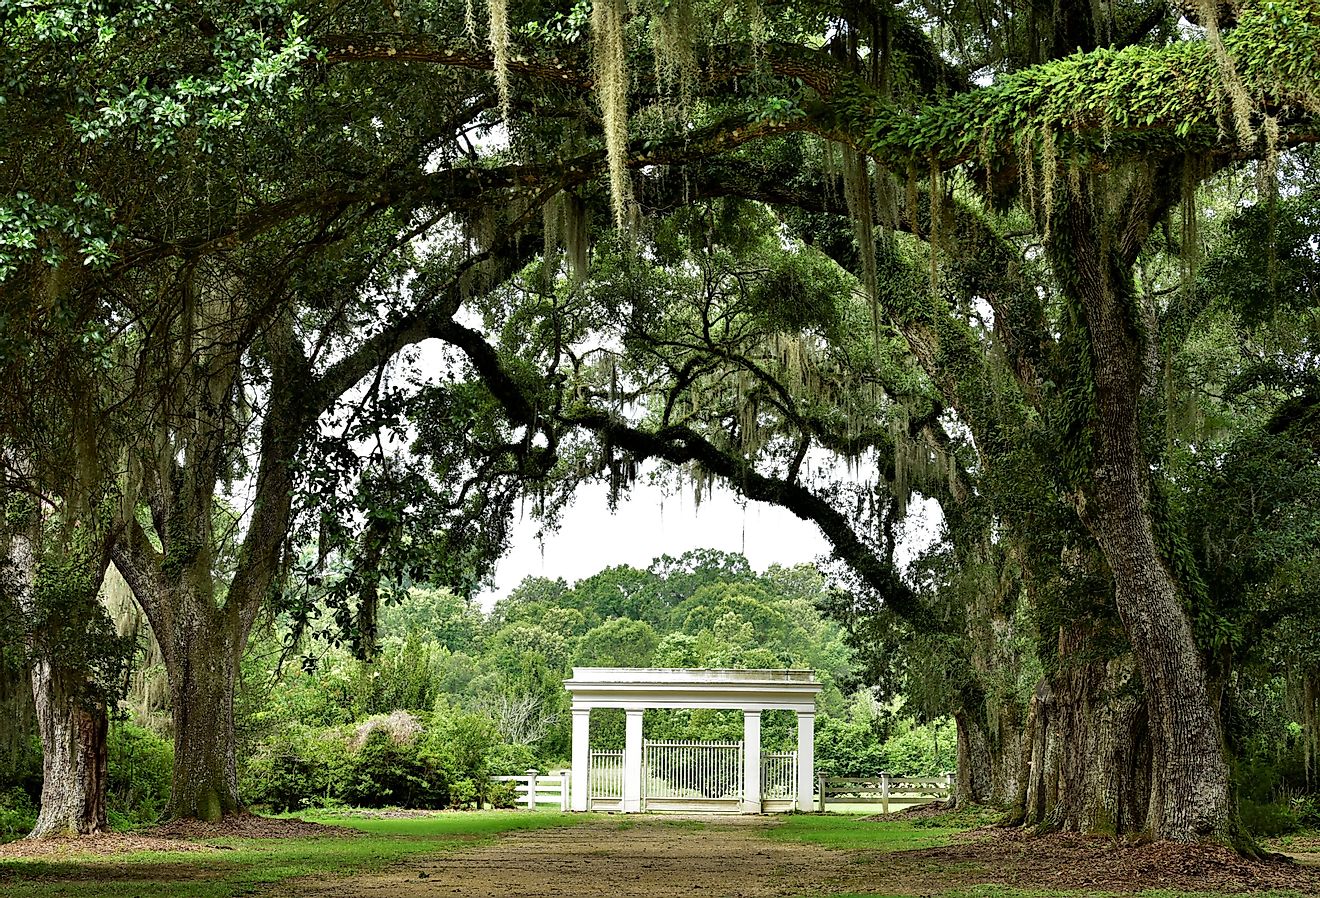 Canopy of live oak branches over Entrance to Rosedown Plantation, State Historic Site, in St. Francisville, Louisiana